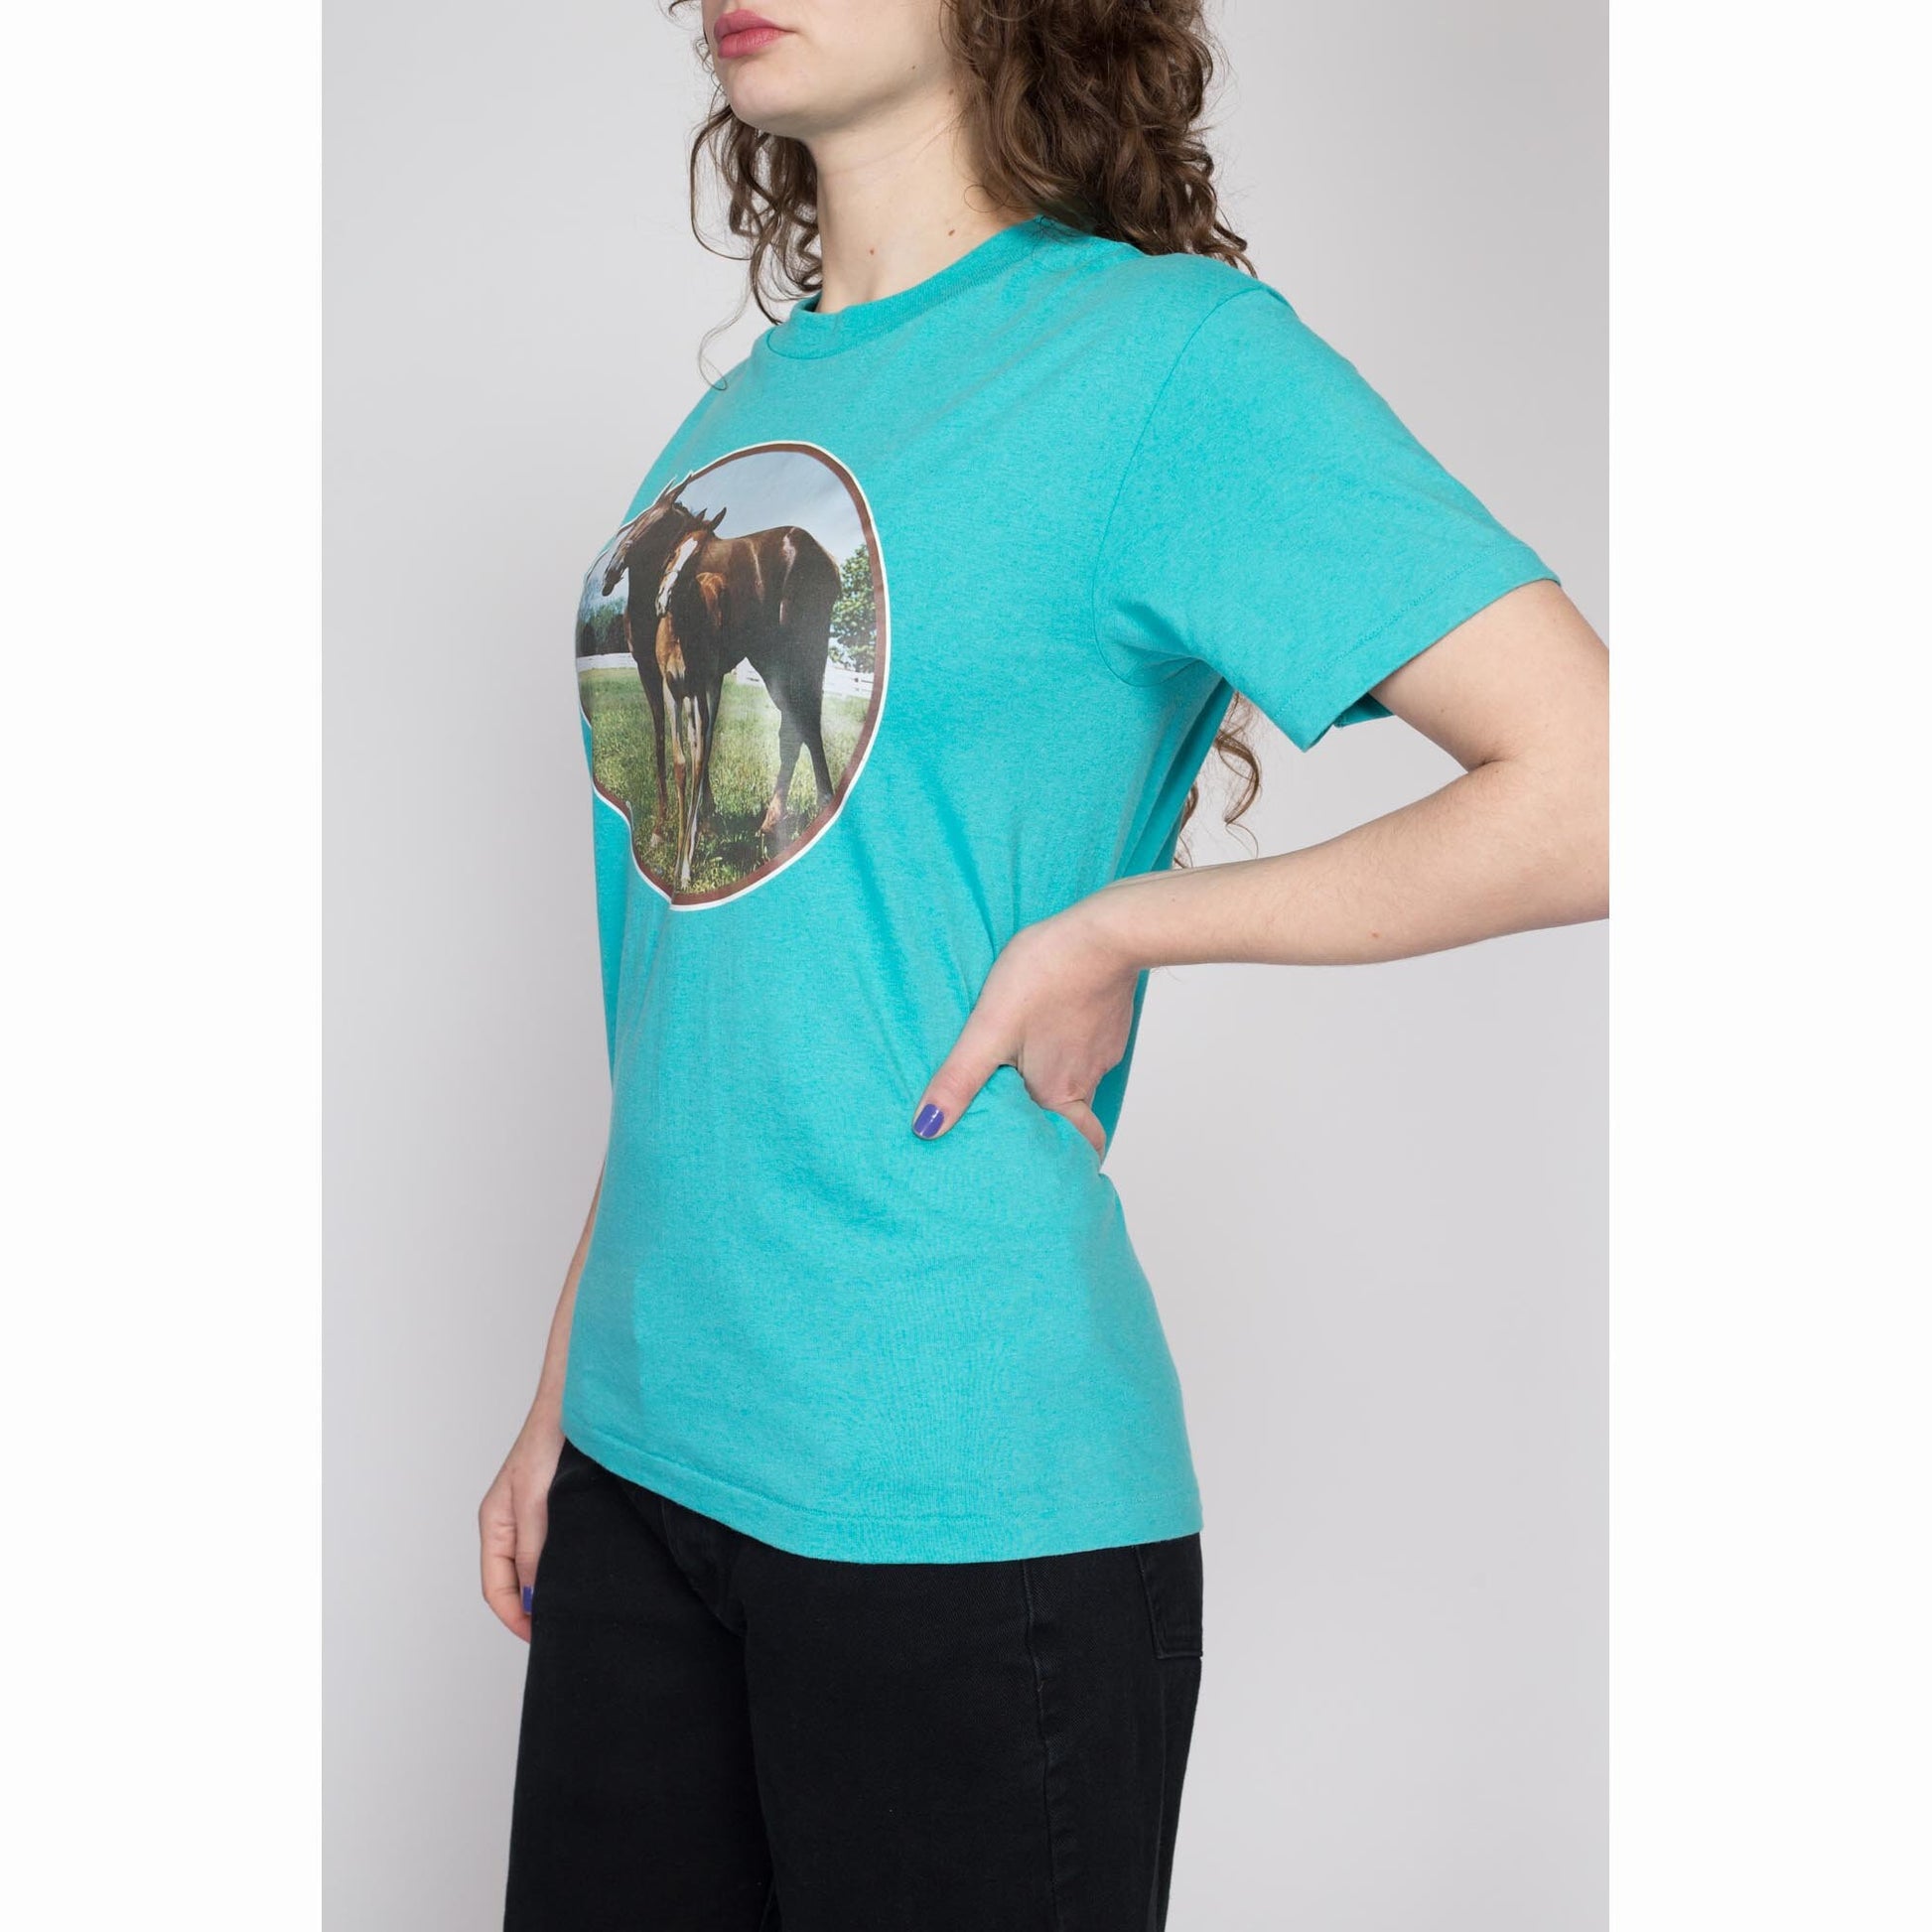 Medium 90s Horse Iron-On Graphic T Shirt | Vintage Turquoise Blue Mare & Foal Animal Tee